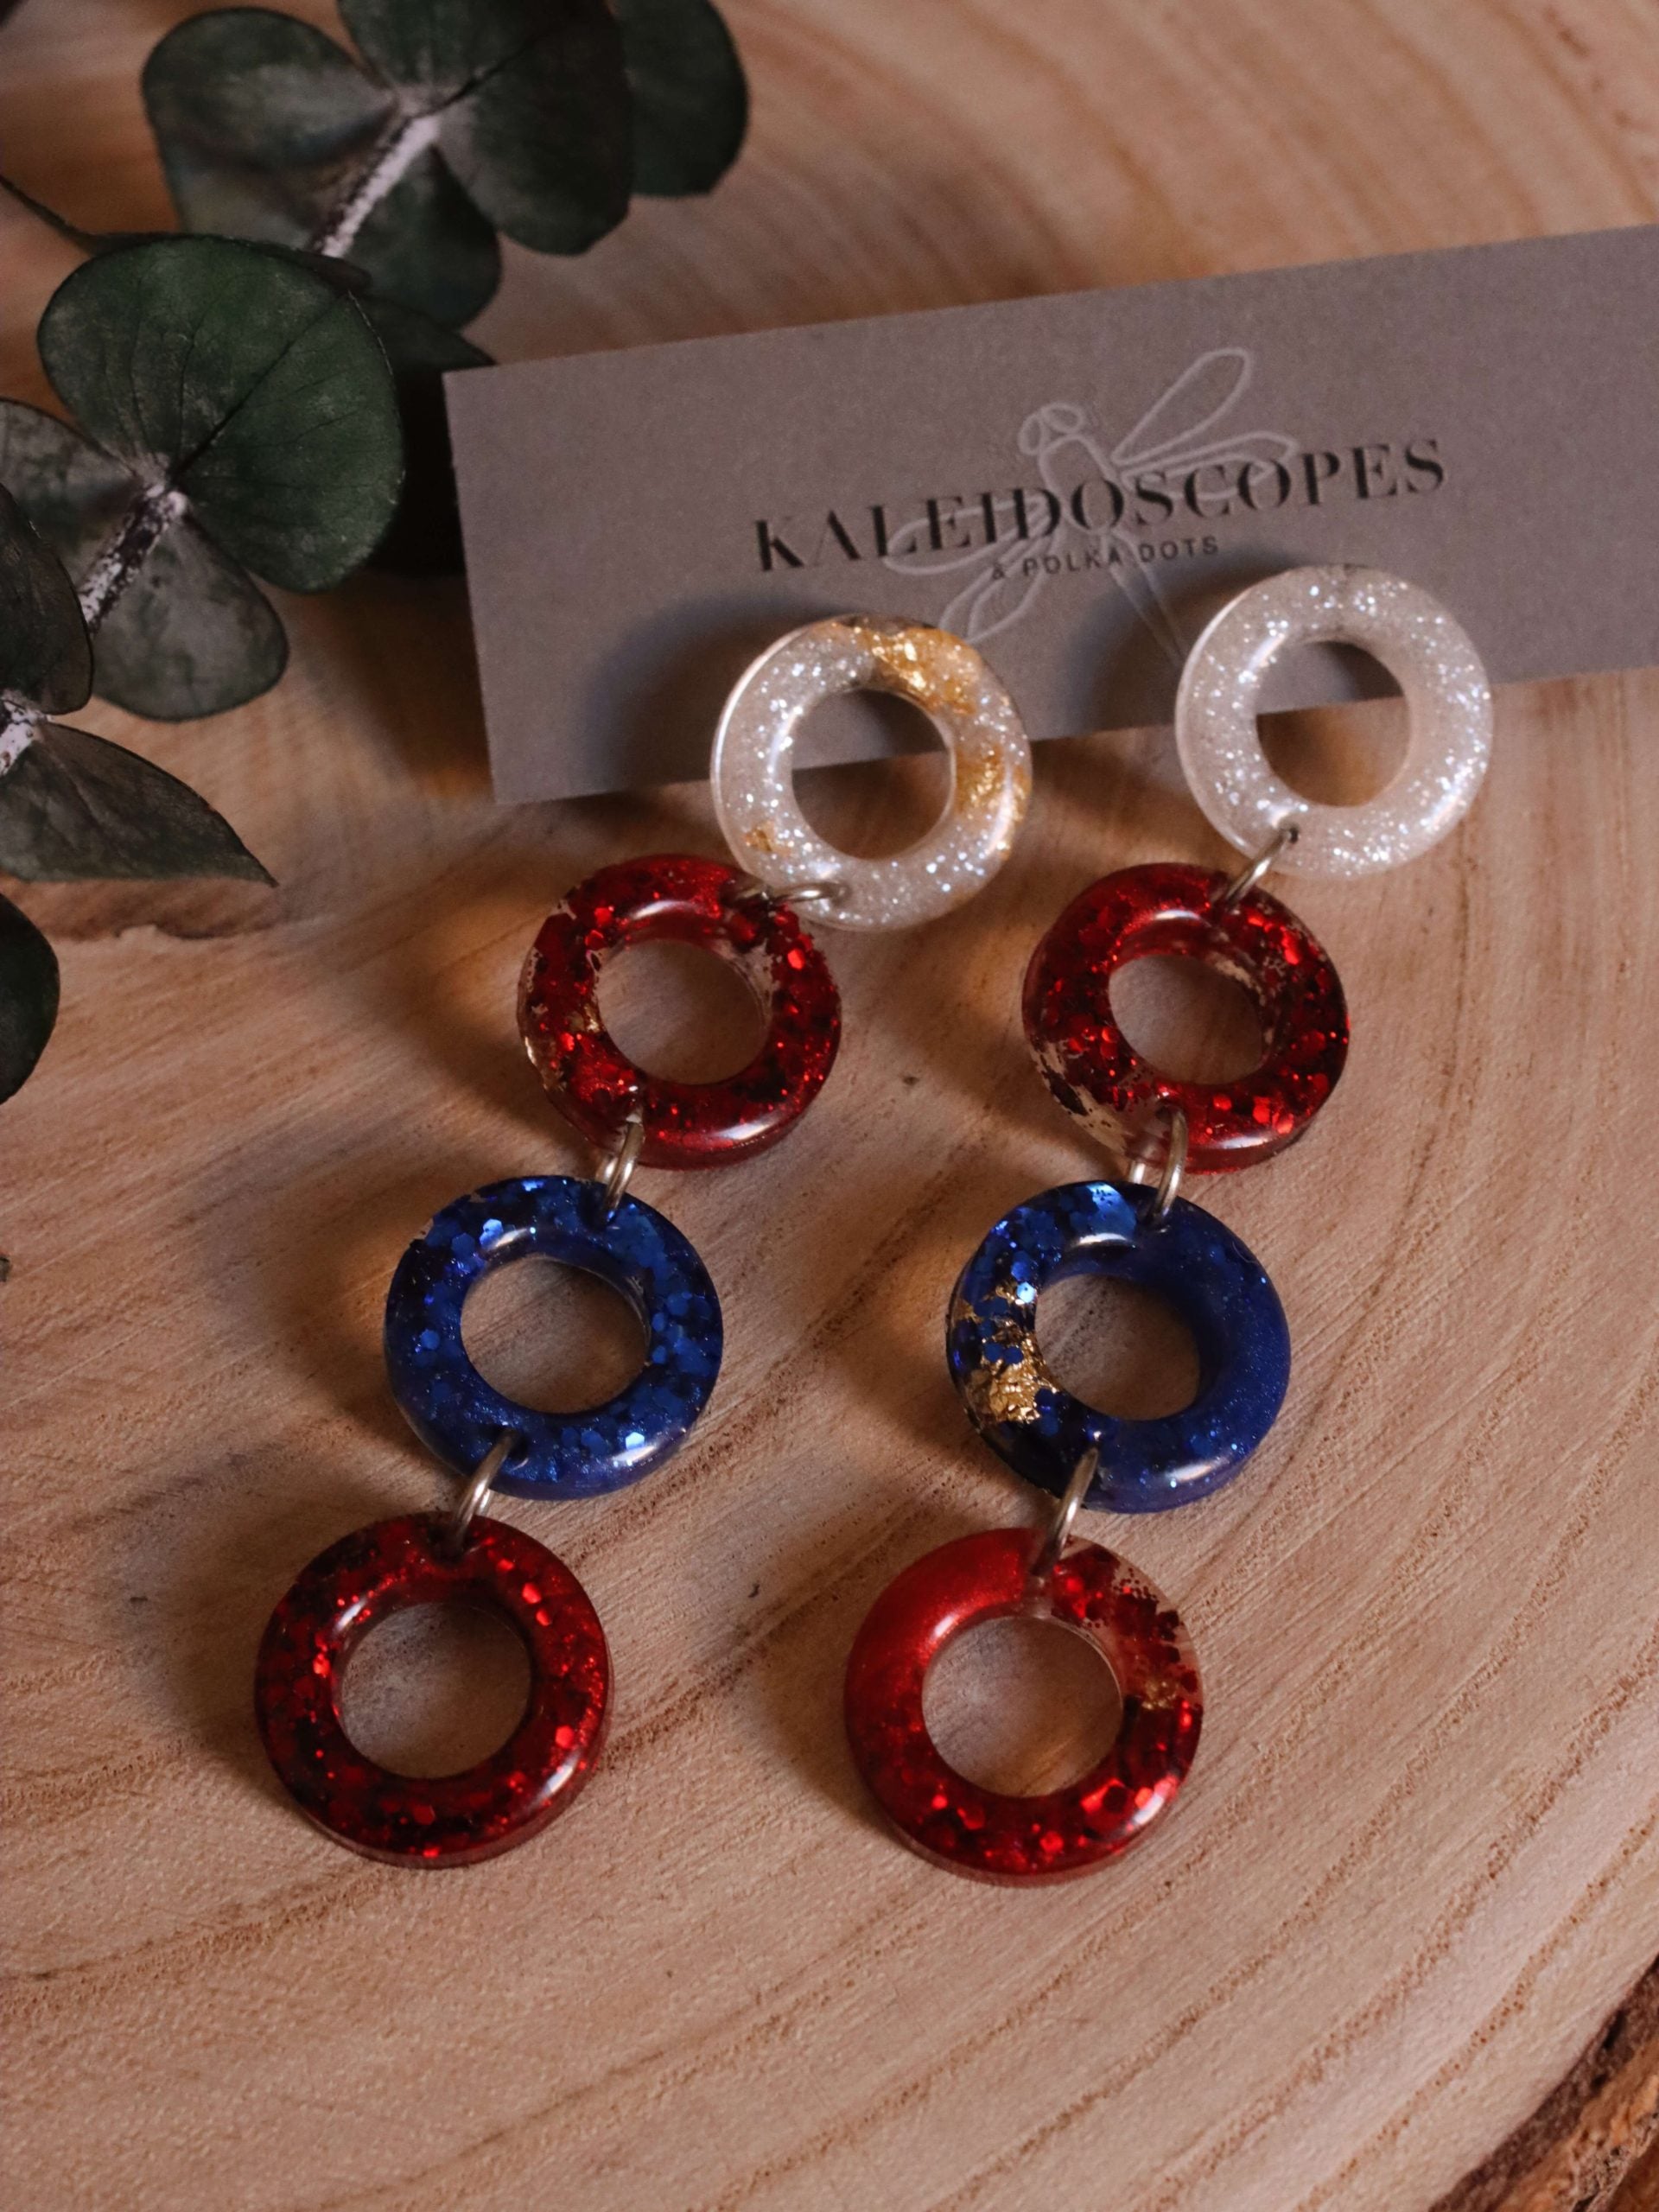 long-patriotic-chain-earrings---hypoallergenic-jewelry--red-white-and-blue-earrings---kaleidoscopes-and-polka-dots